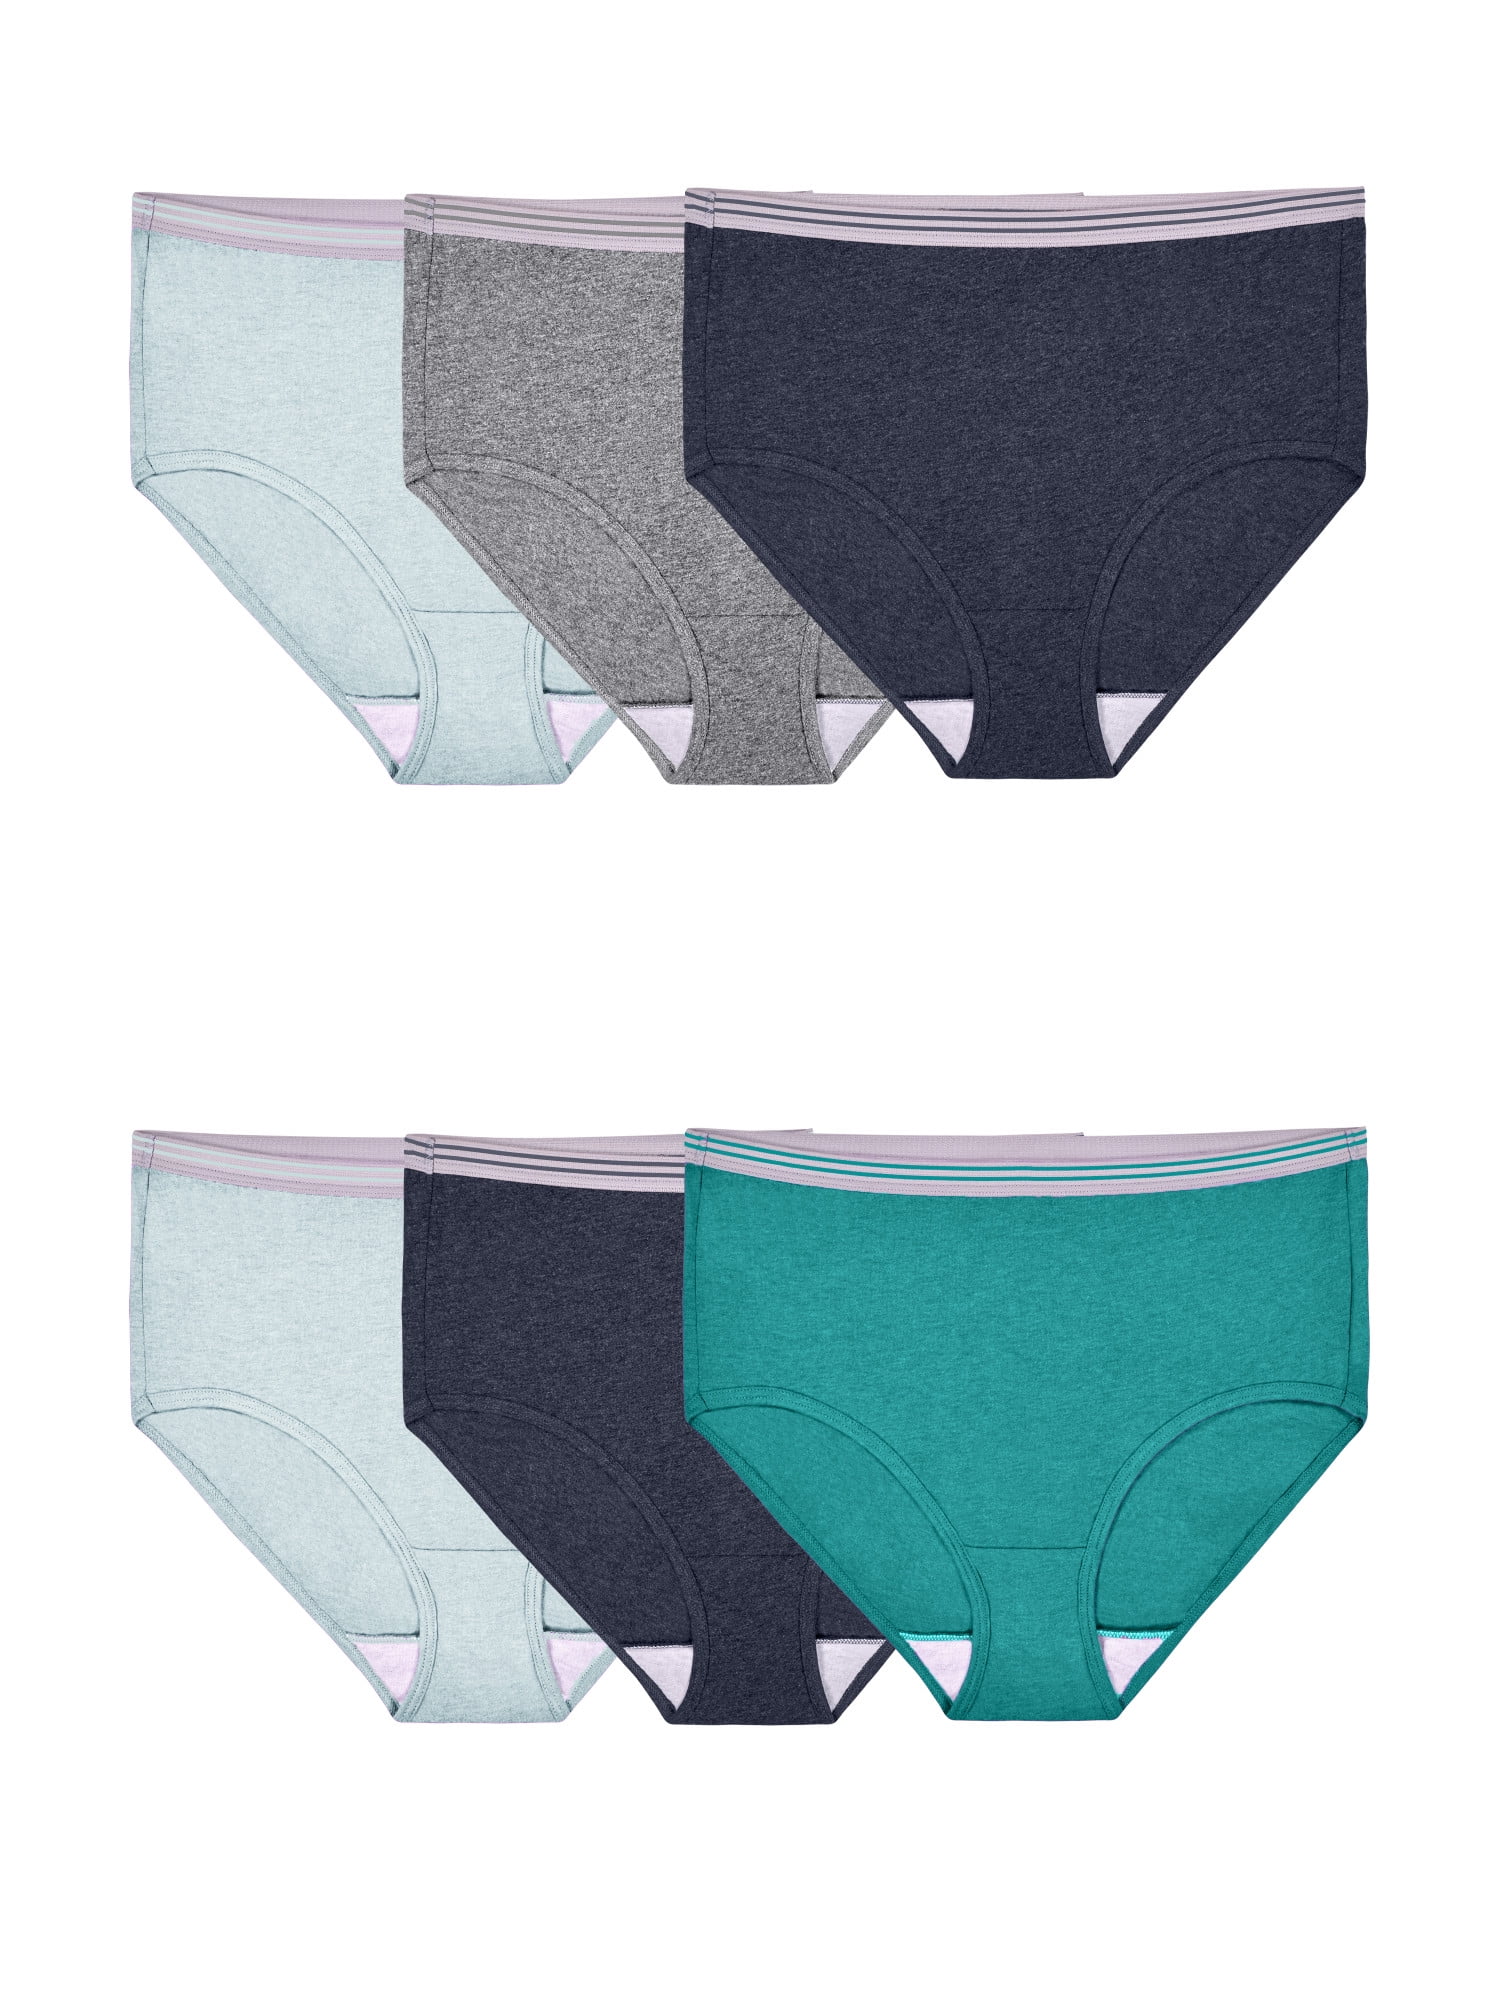 Fruit of the Loom Women's 6pk Comfort Supreme Briefs - Colors May Vary 6